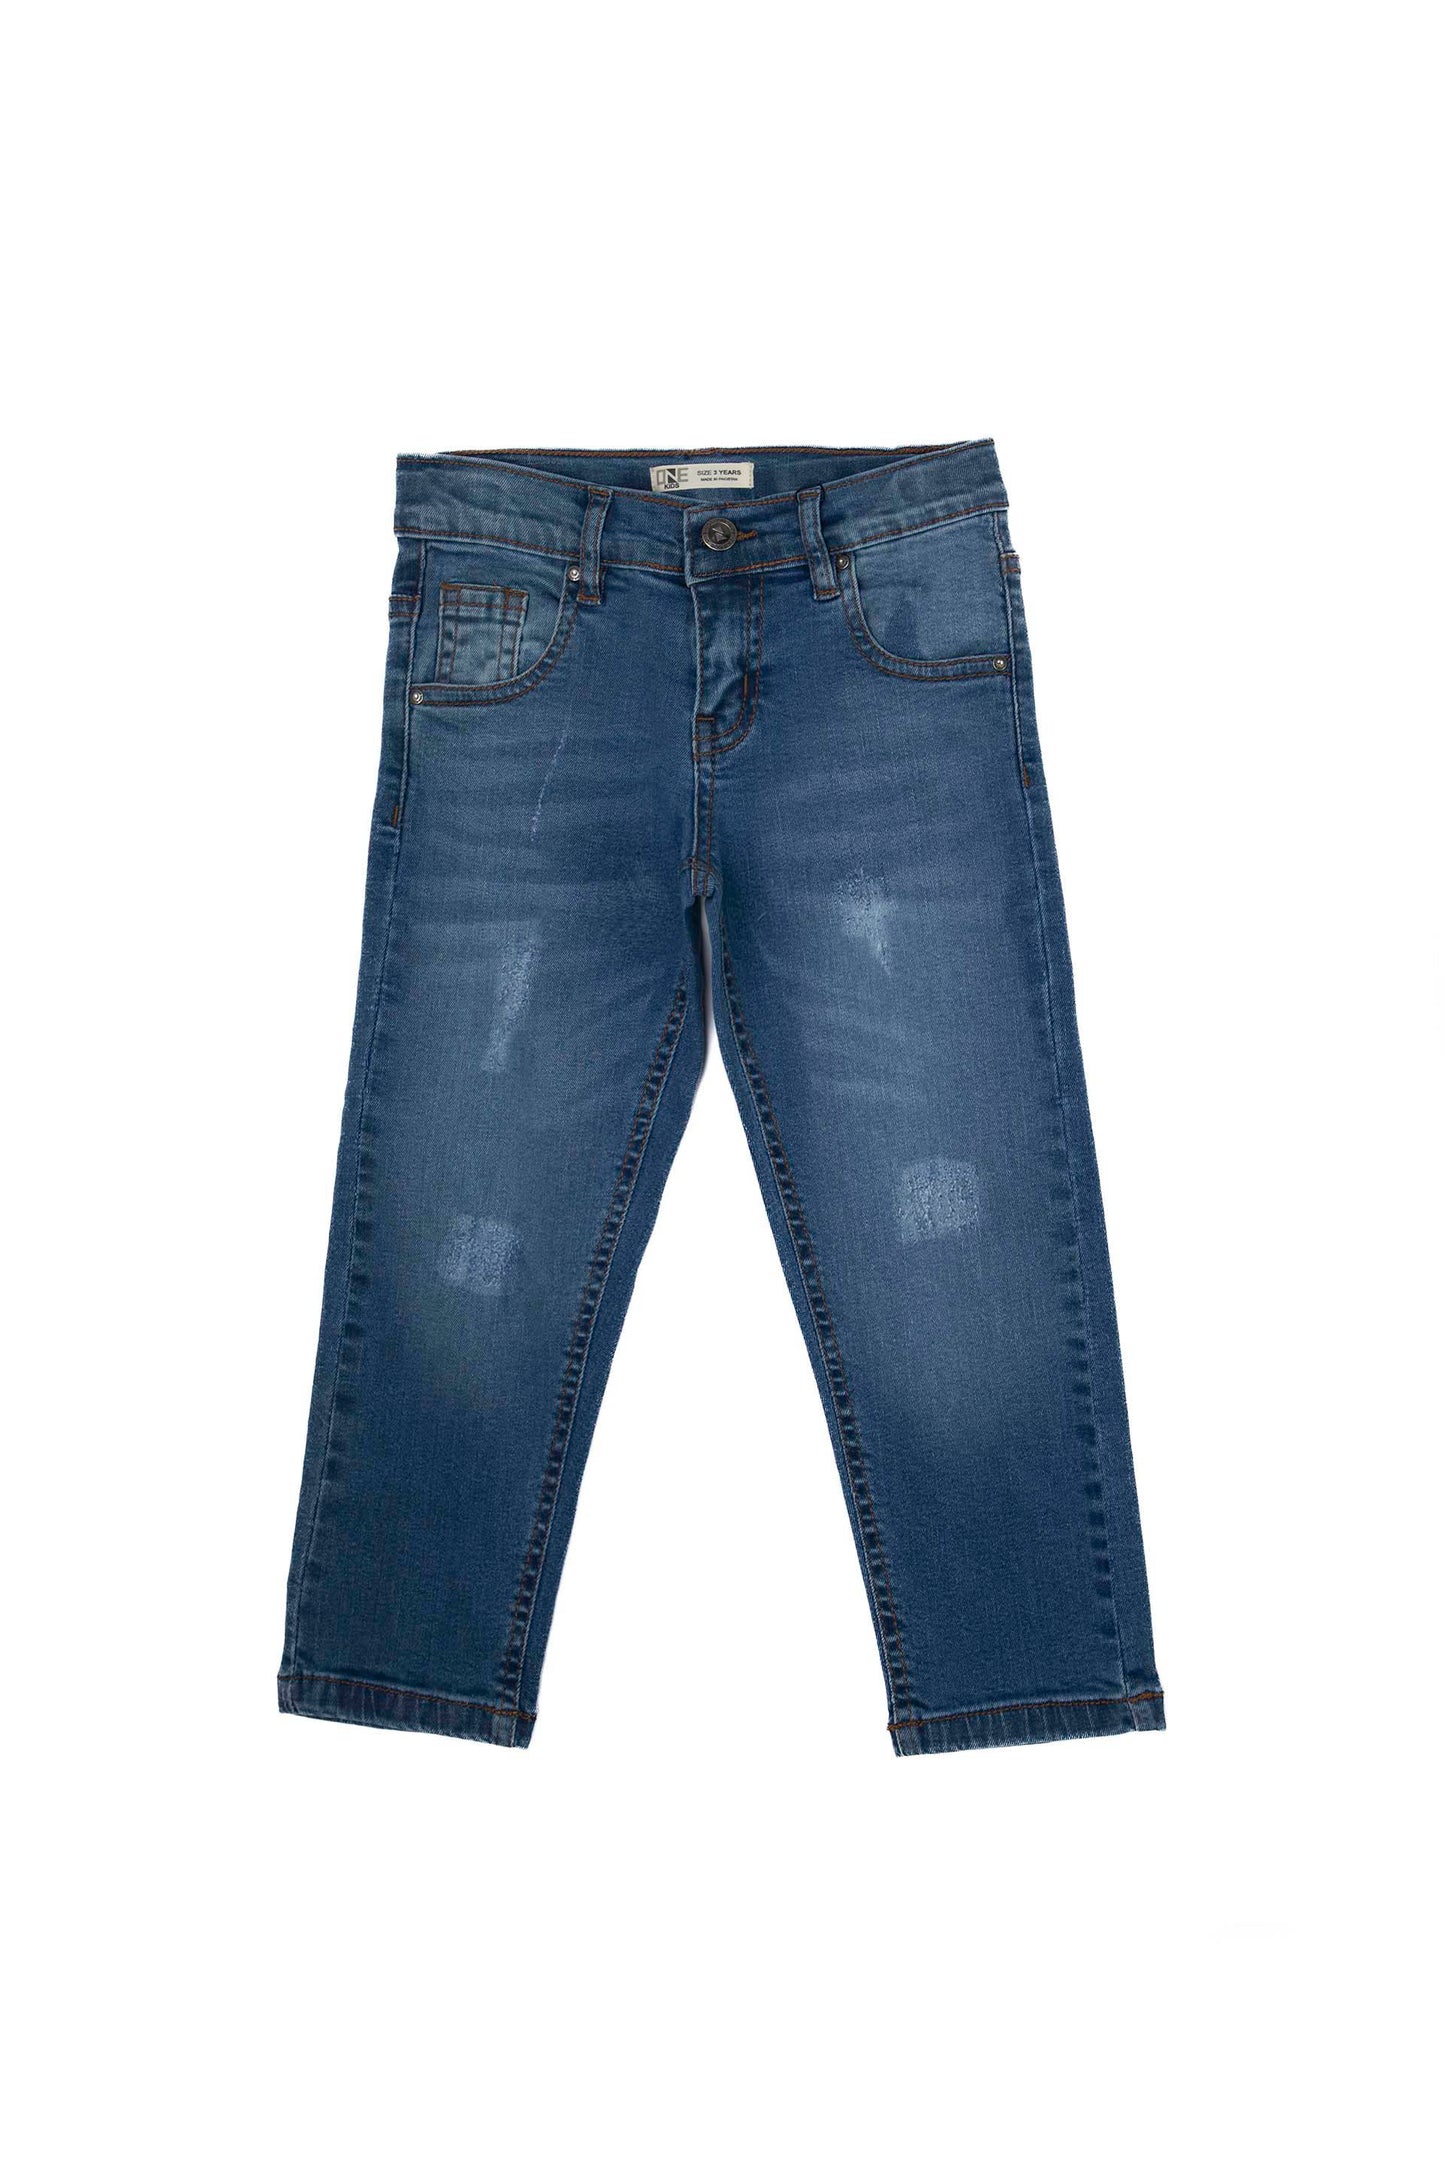 Rugged Jeans Blue